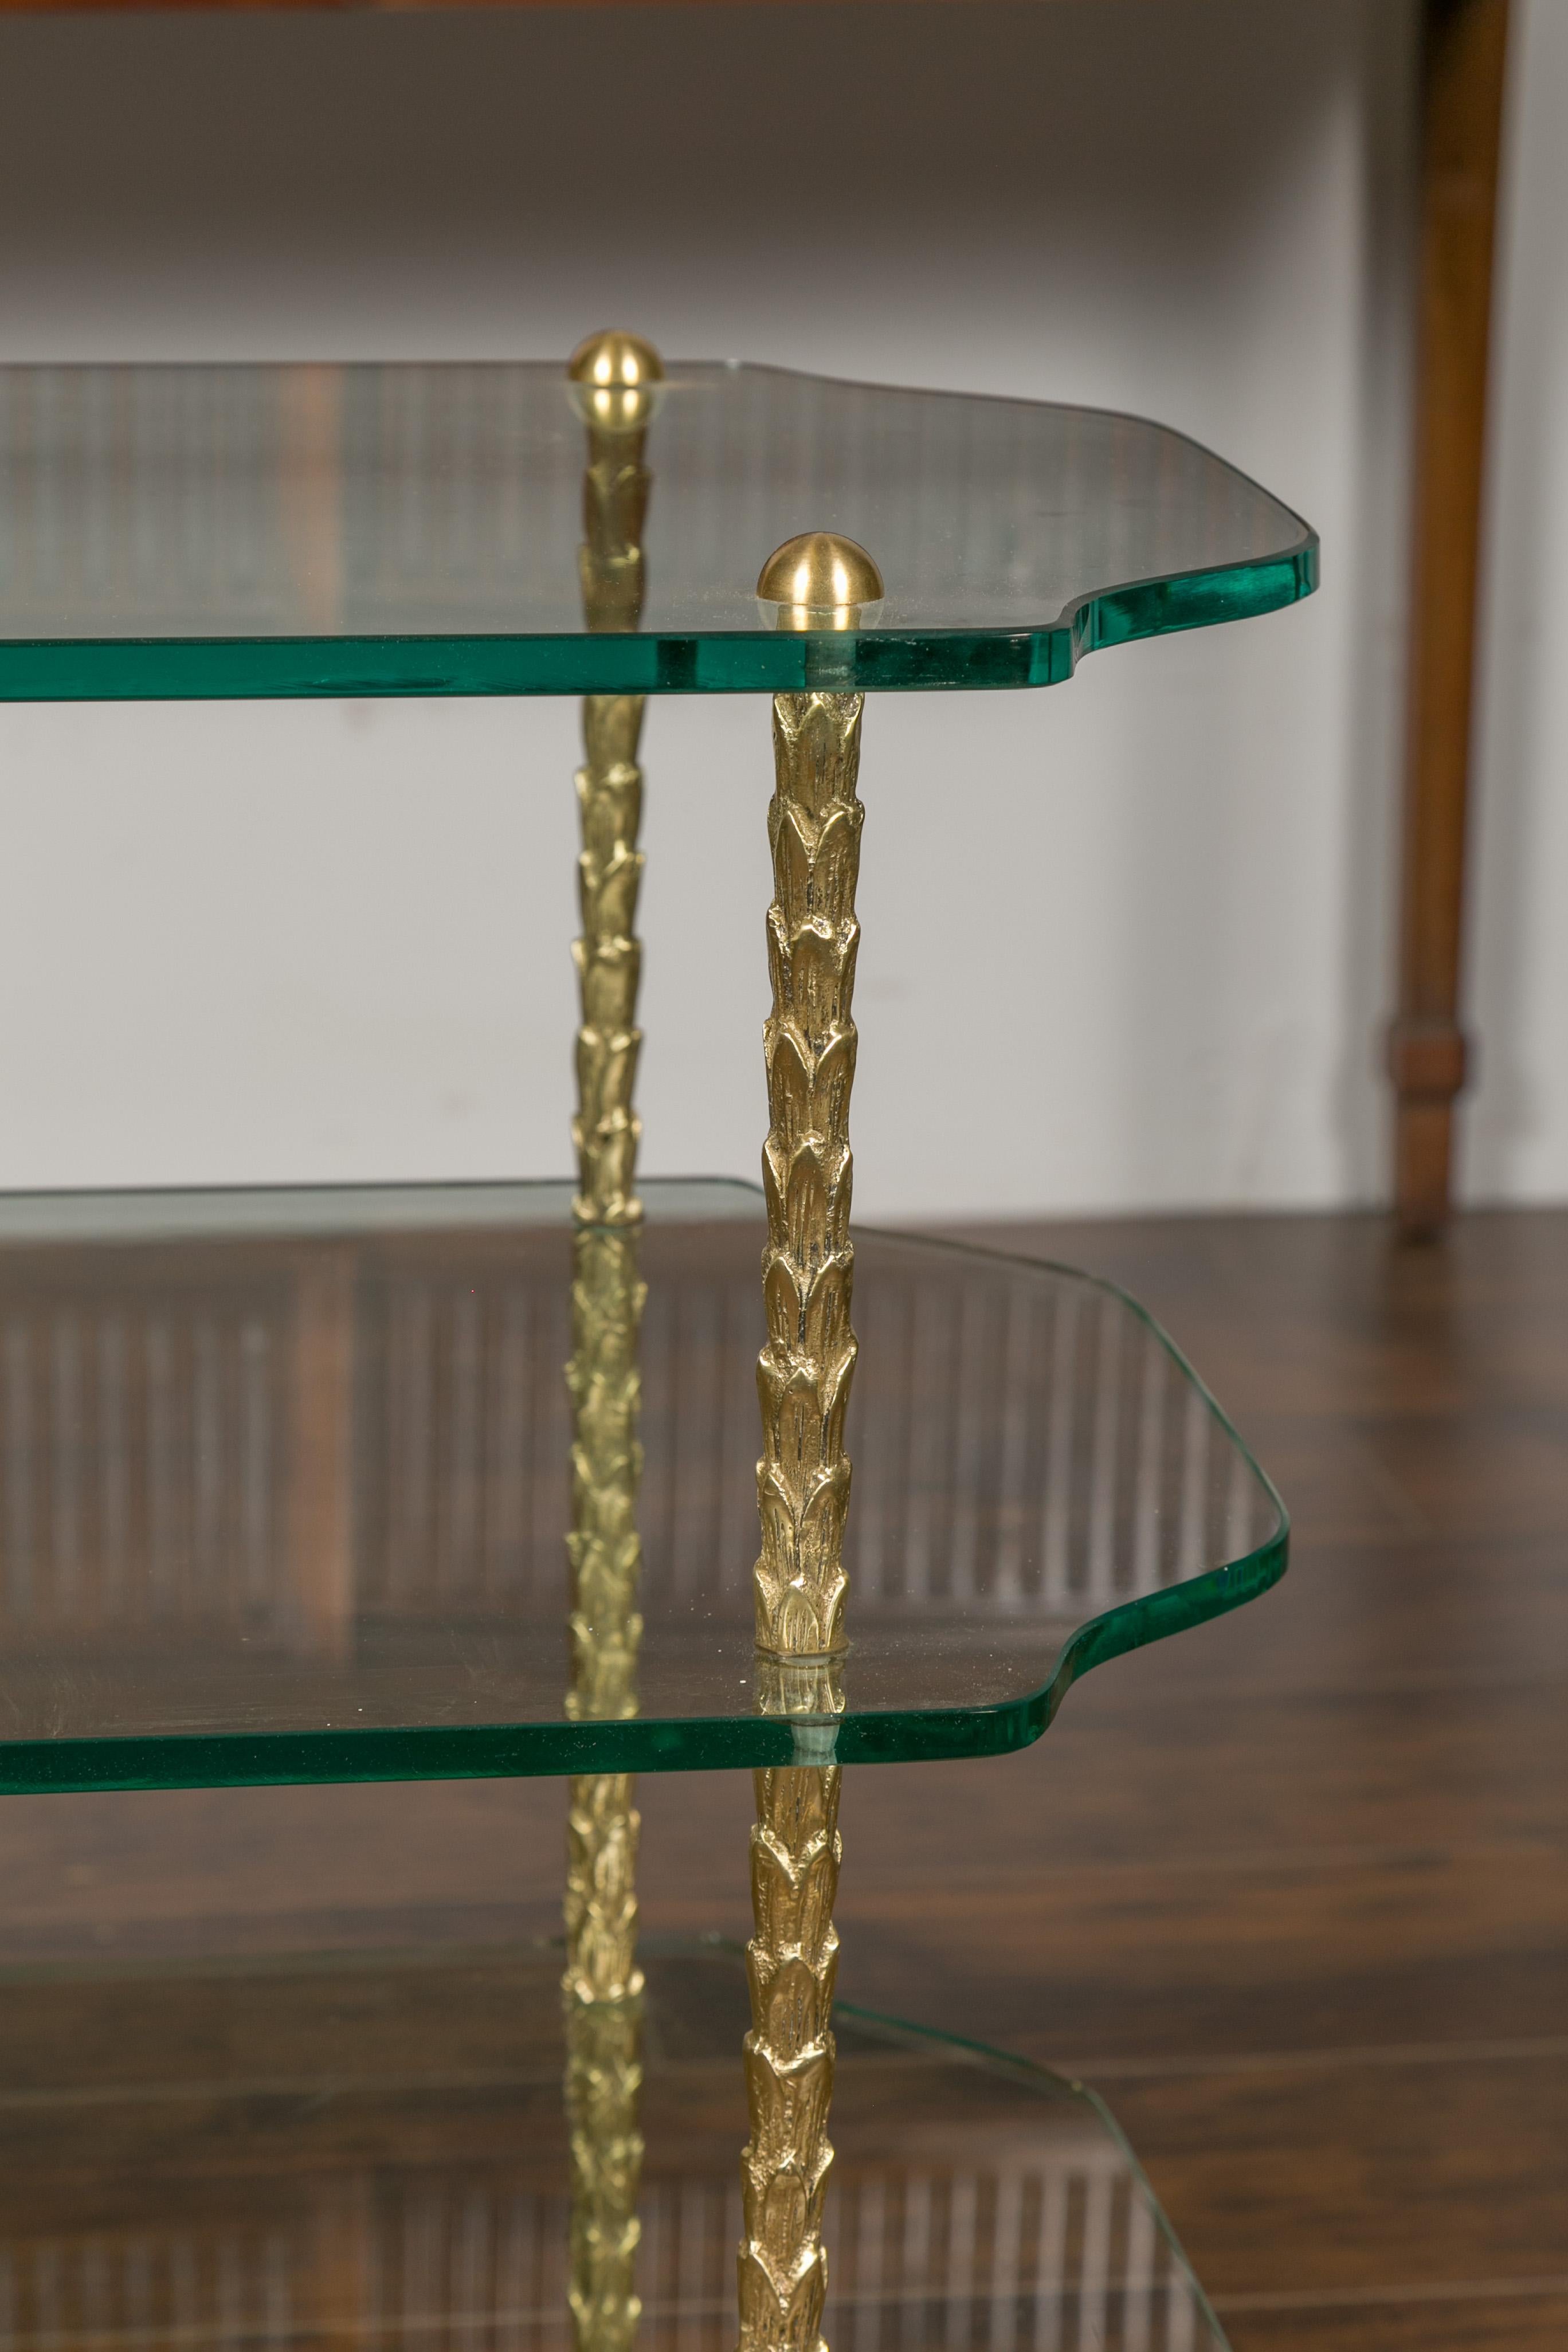 20th Century Midcentury Brass Three-Tiered Table with Glass Shelves and Foliage Motifs For Sale